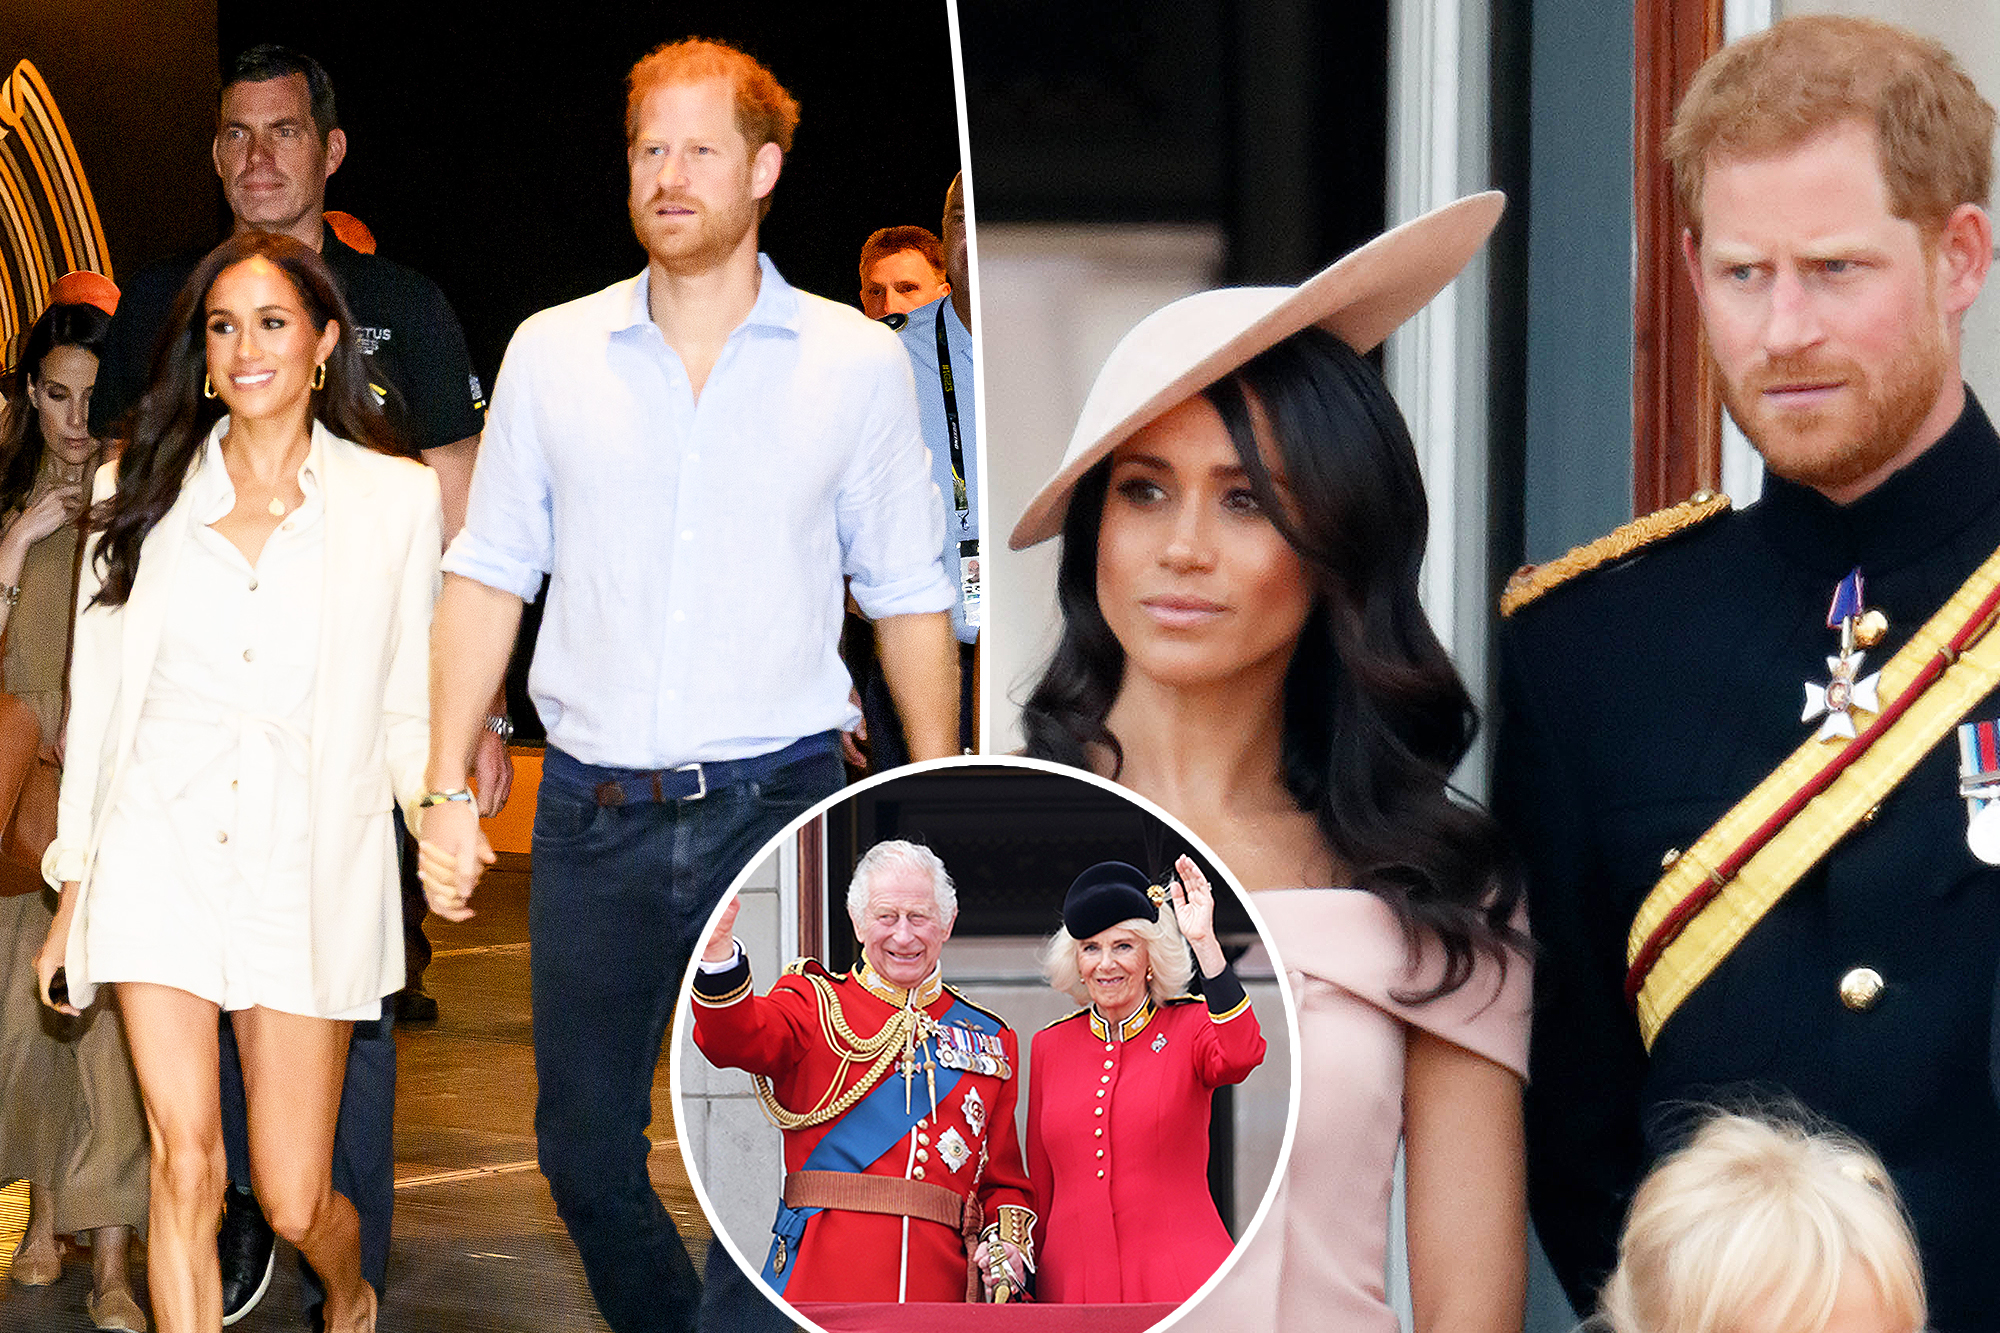 Prince Harry and Meghan Markle Excluded from Trooping the Colour Celebration for Second Consecutive Year